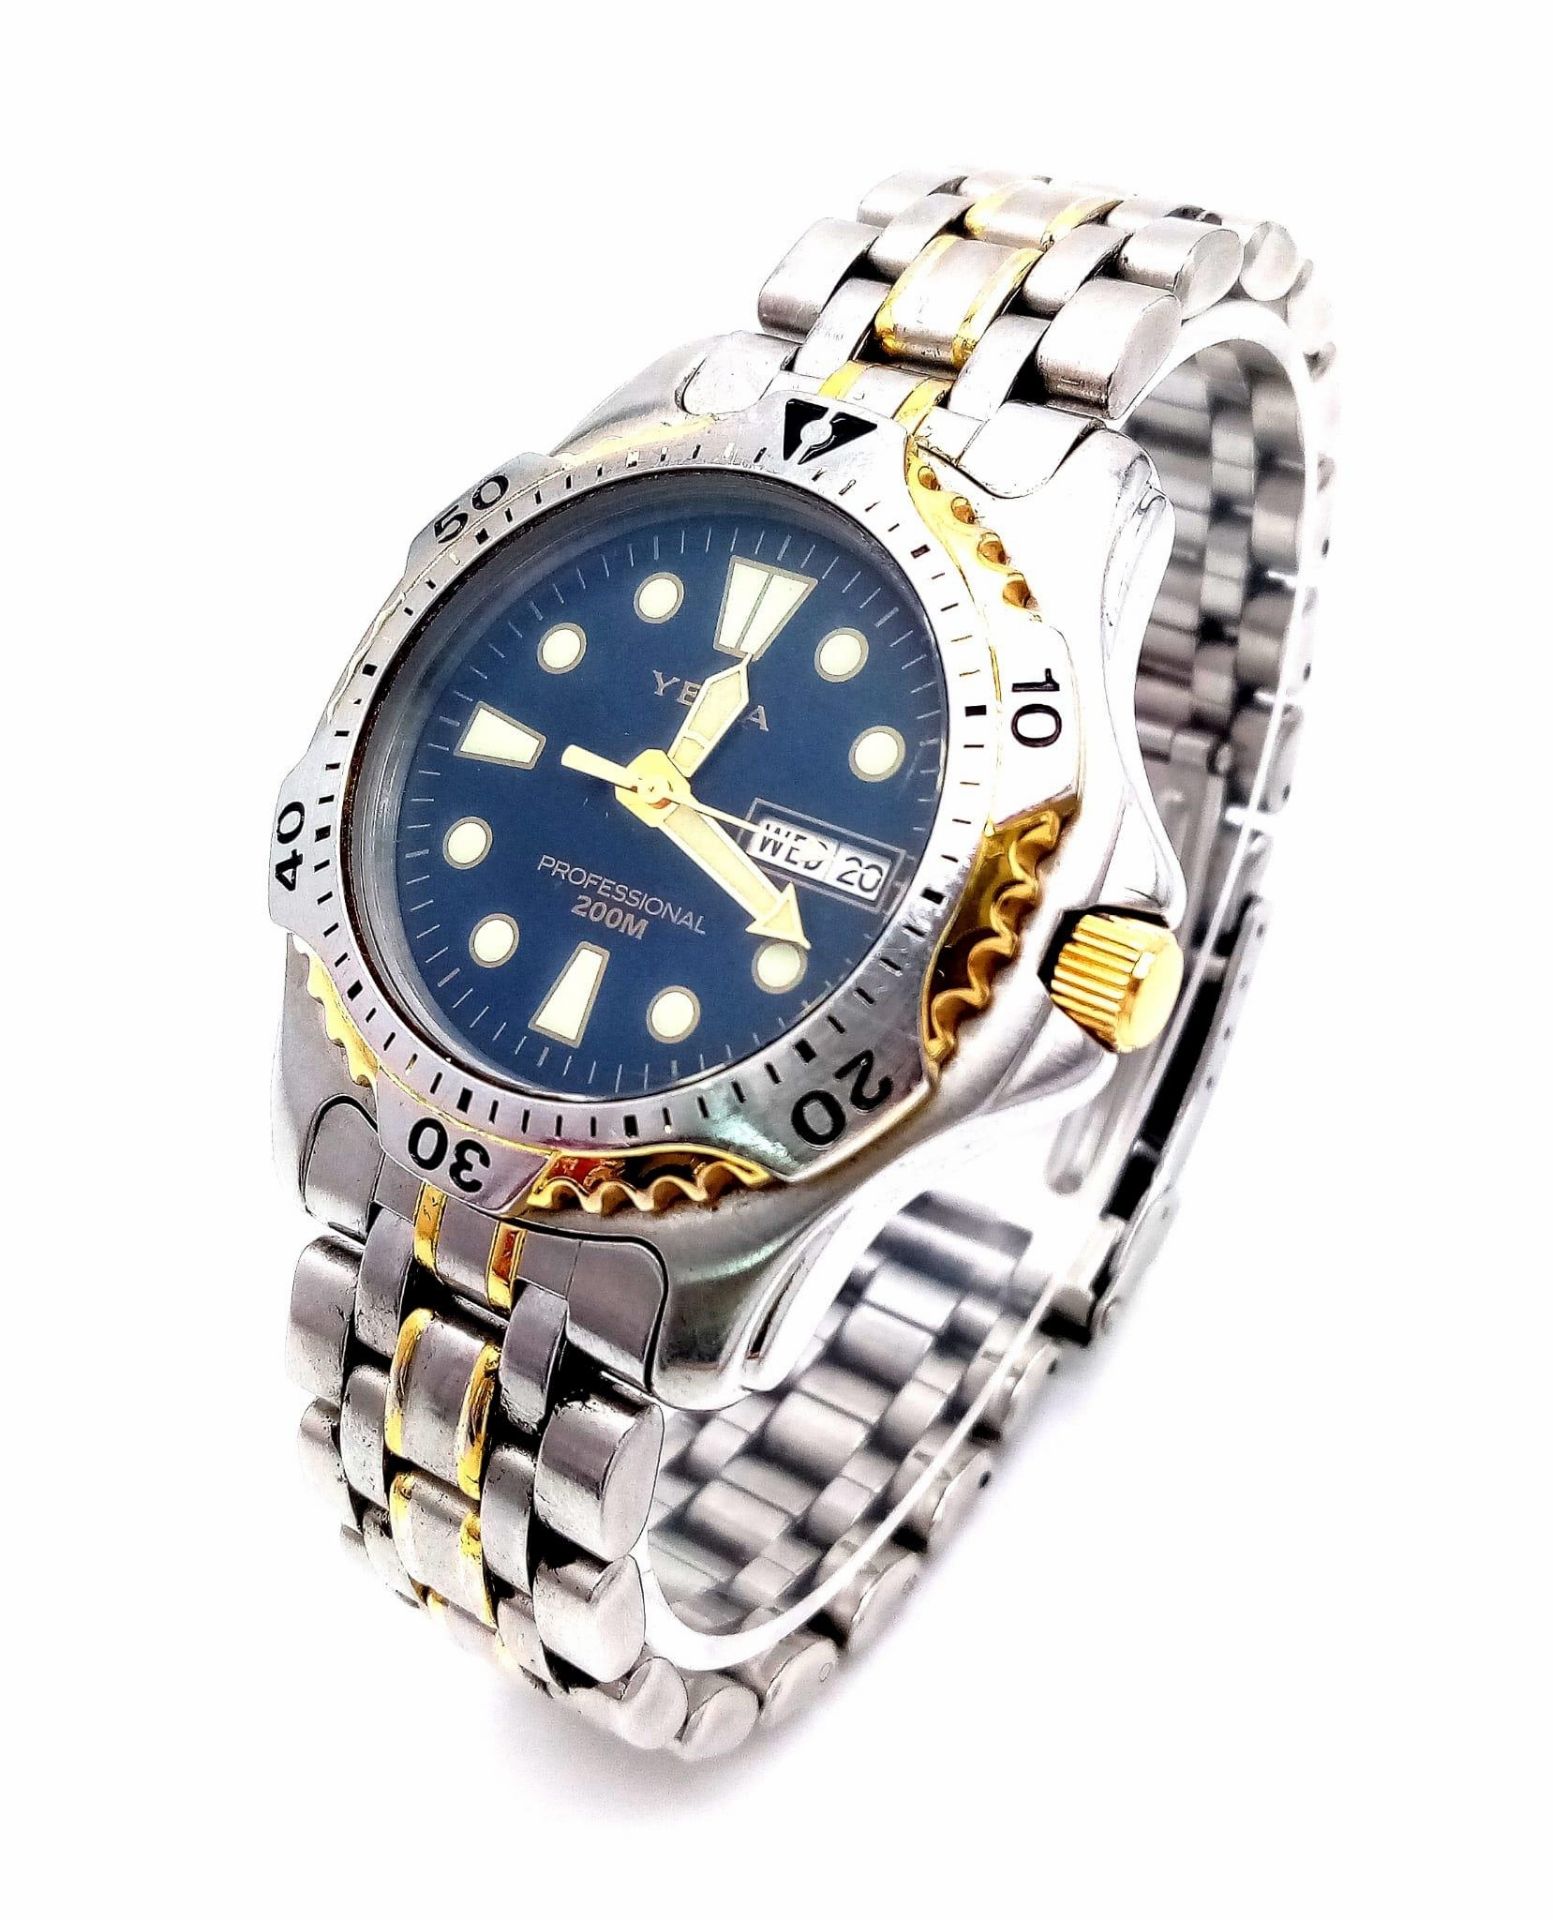 A Yema Bi-Metal Stainless Steel Professional, Day/Date, Quartz Divers Watch. 45mm Including Crown.